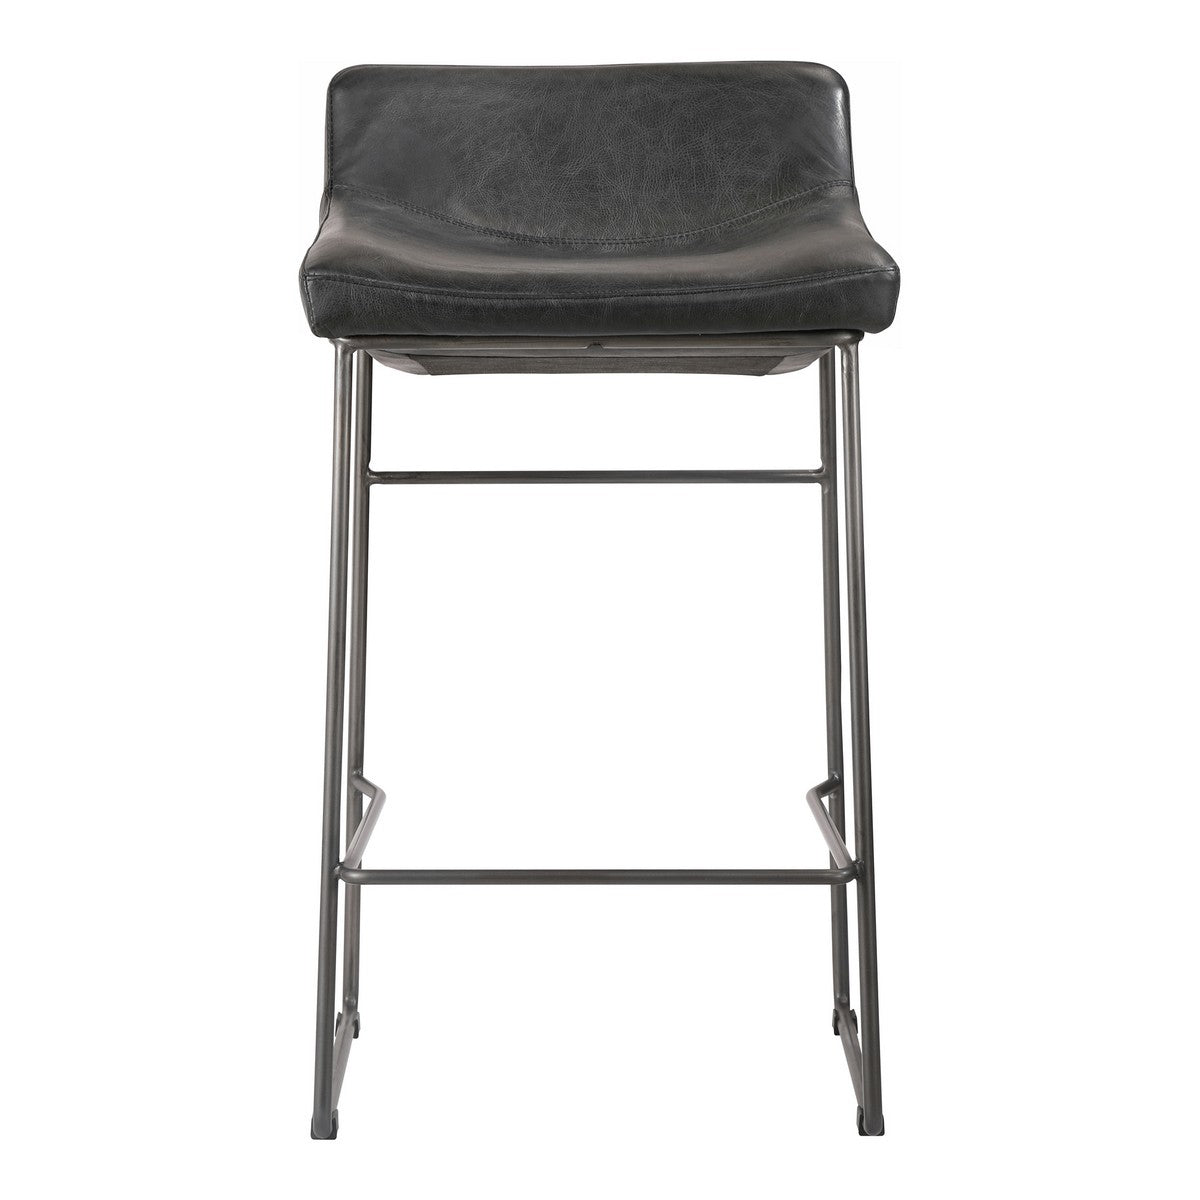 Moe's Home Collection Starlet Counter Stool Black-Set of Two - PK-1106-02 - Moe's Home Collection - Counter Stools - Minimal And Modern - 1